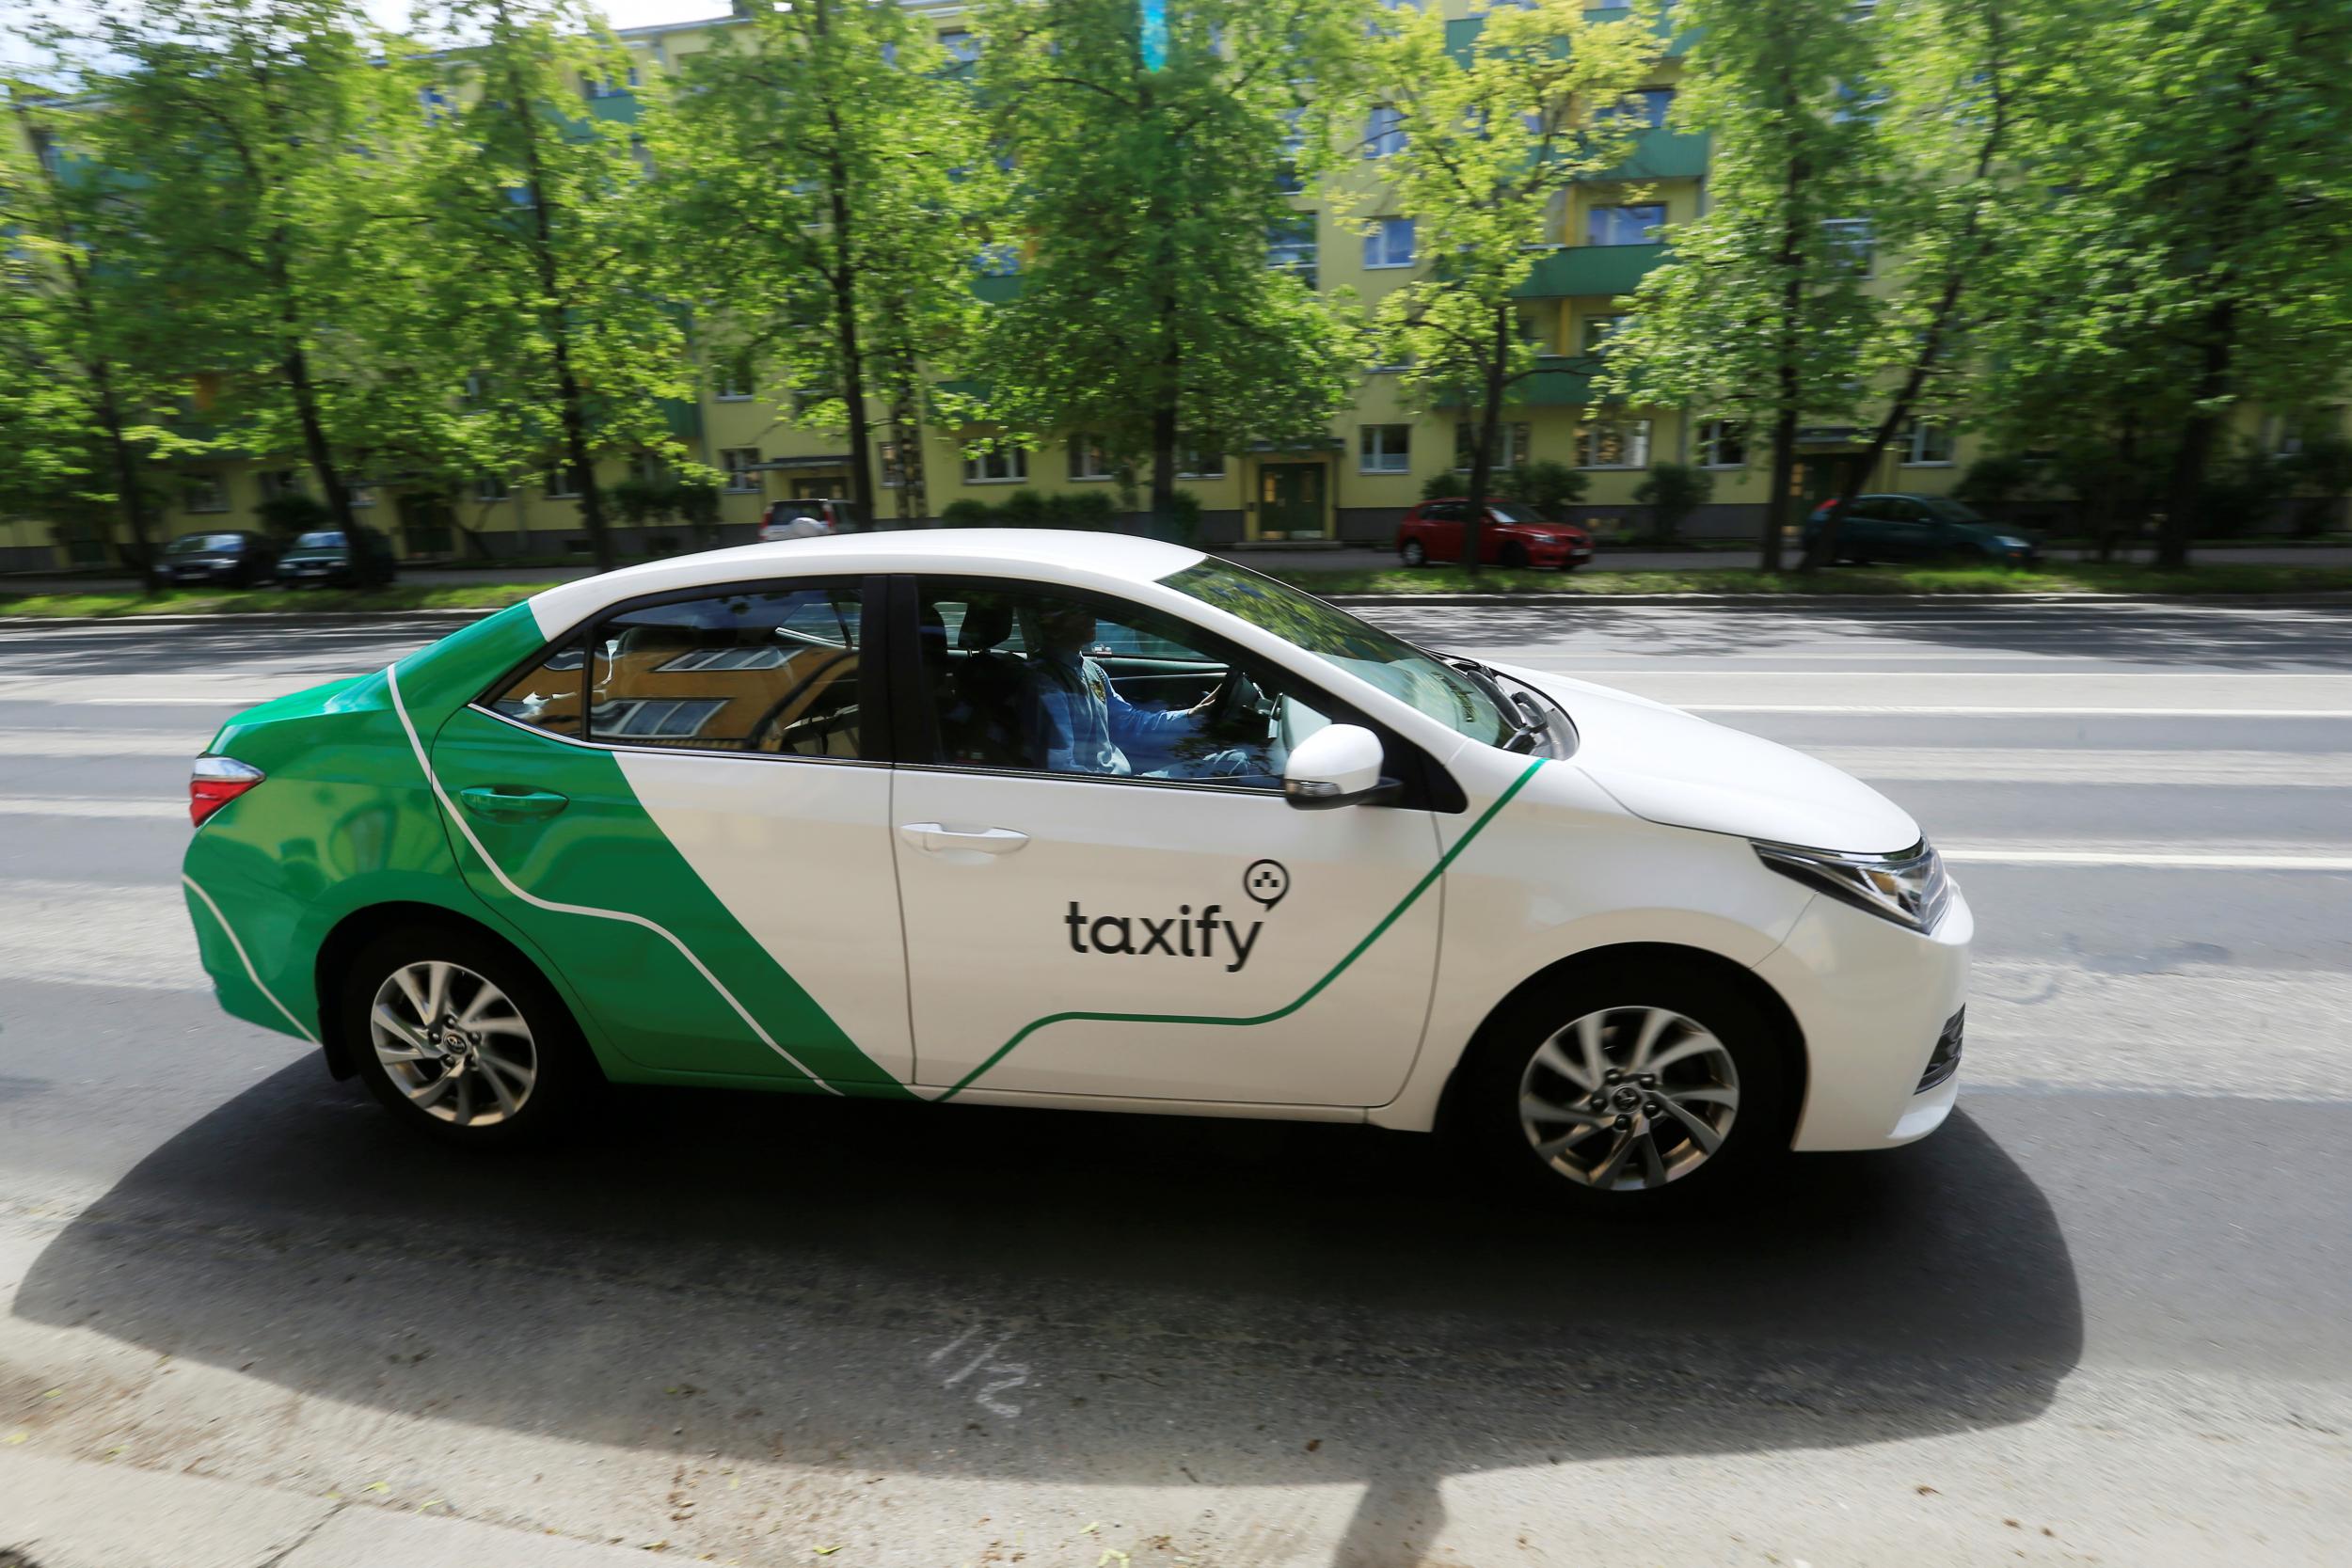 Taxify holds sway in eastern and central Europe